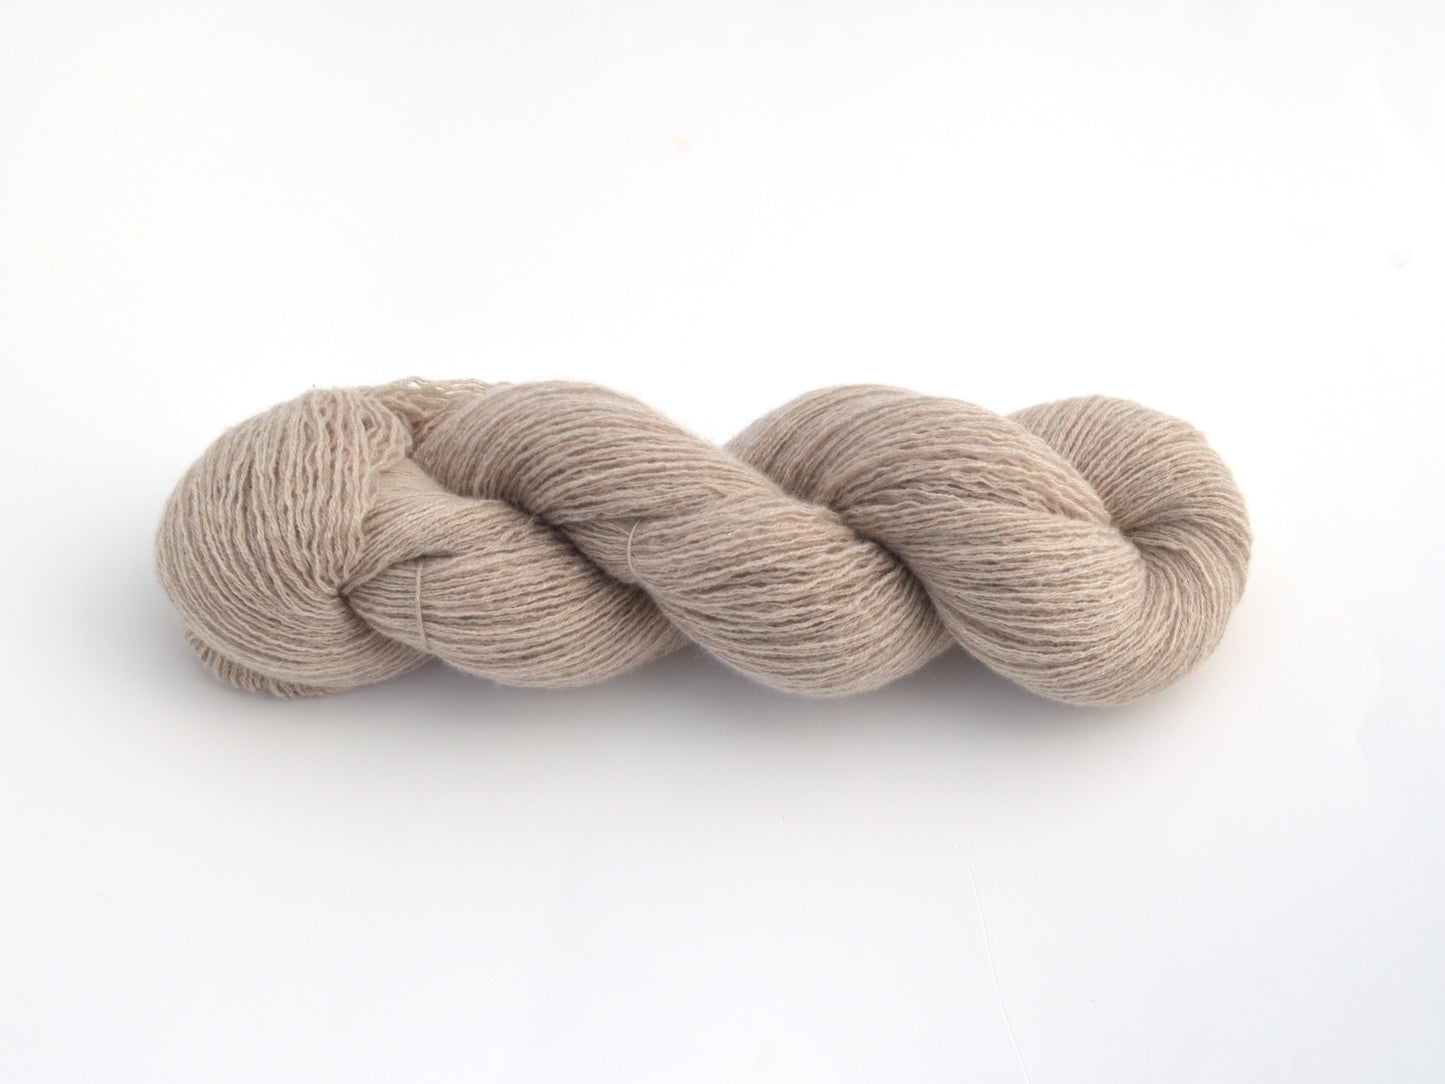 Heavy Lace Weight Recycled Cashmere Yarn in Oatmeal Beige